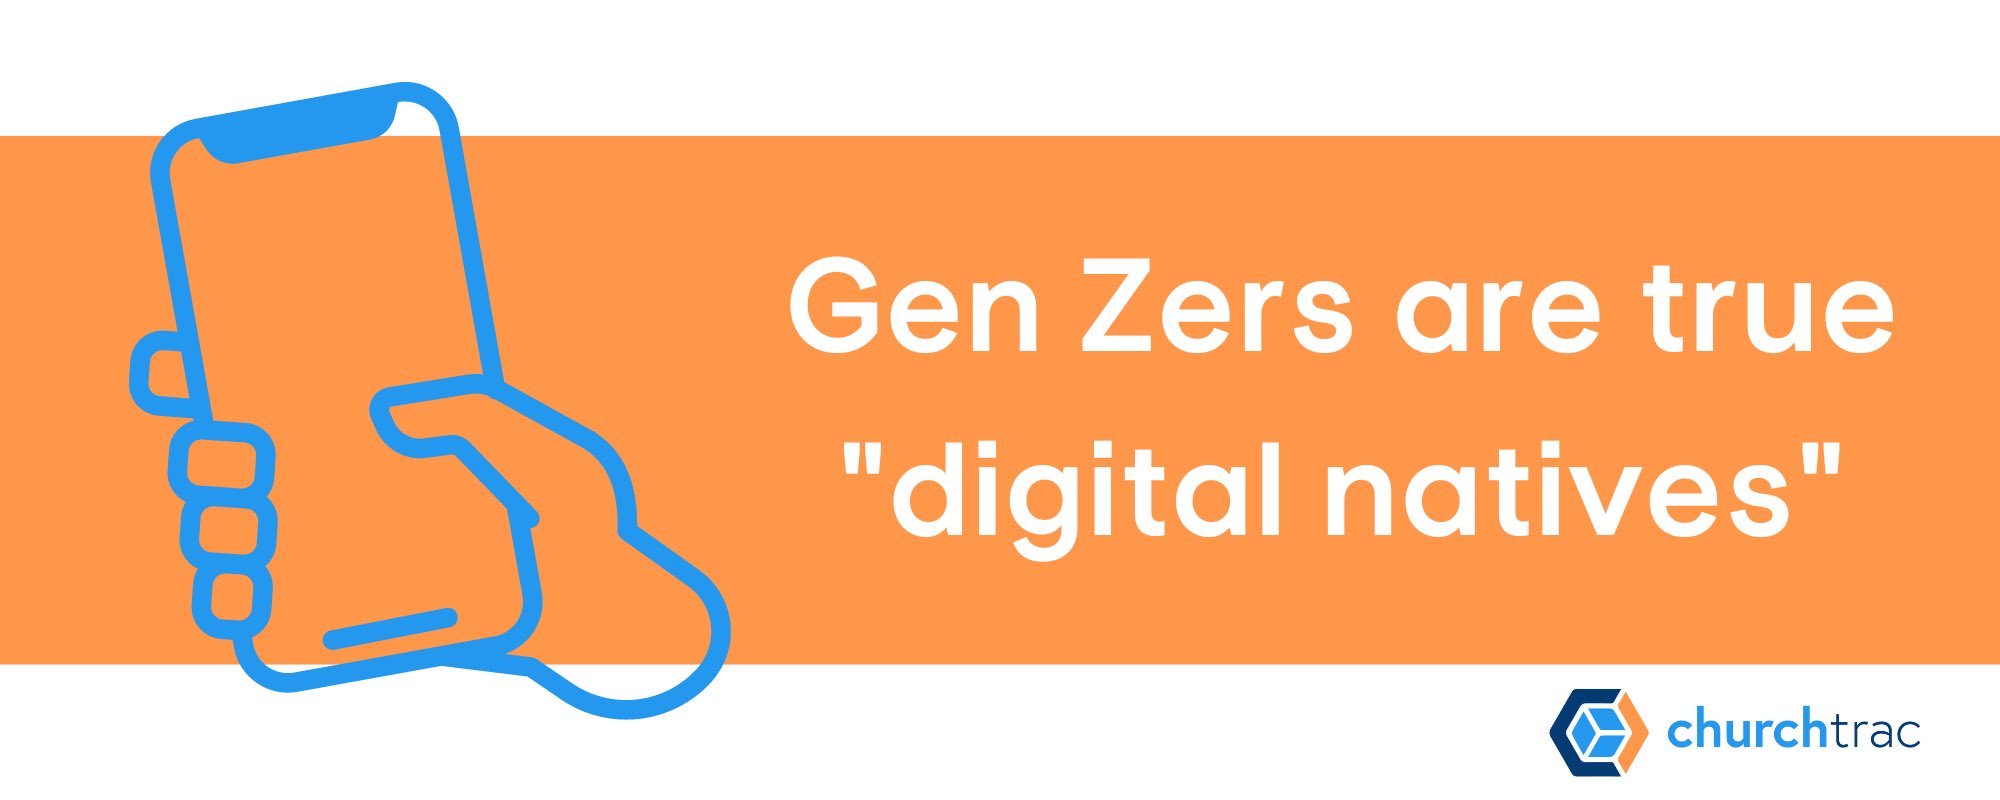 What Distinguishes Generation Z from Previous Generations is that Gen Zers are the first to be true digital natives